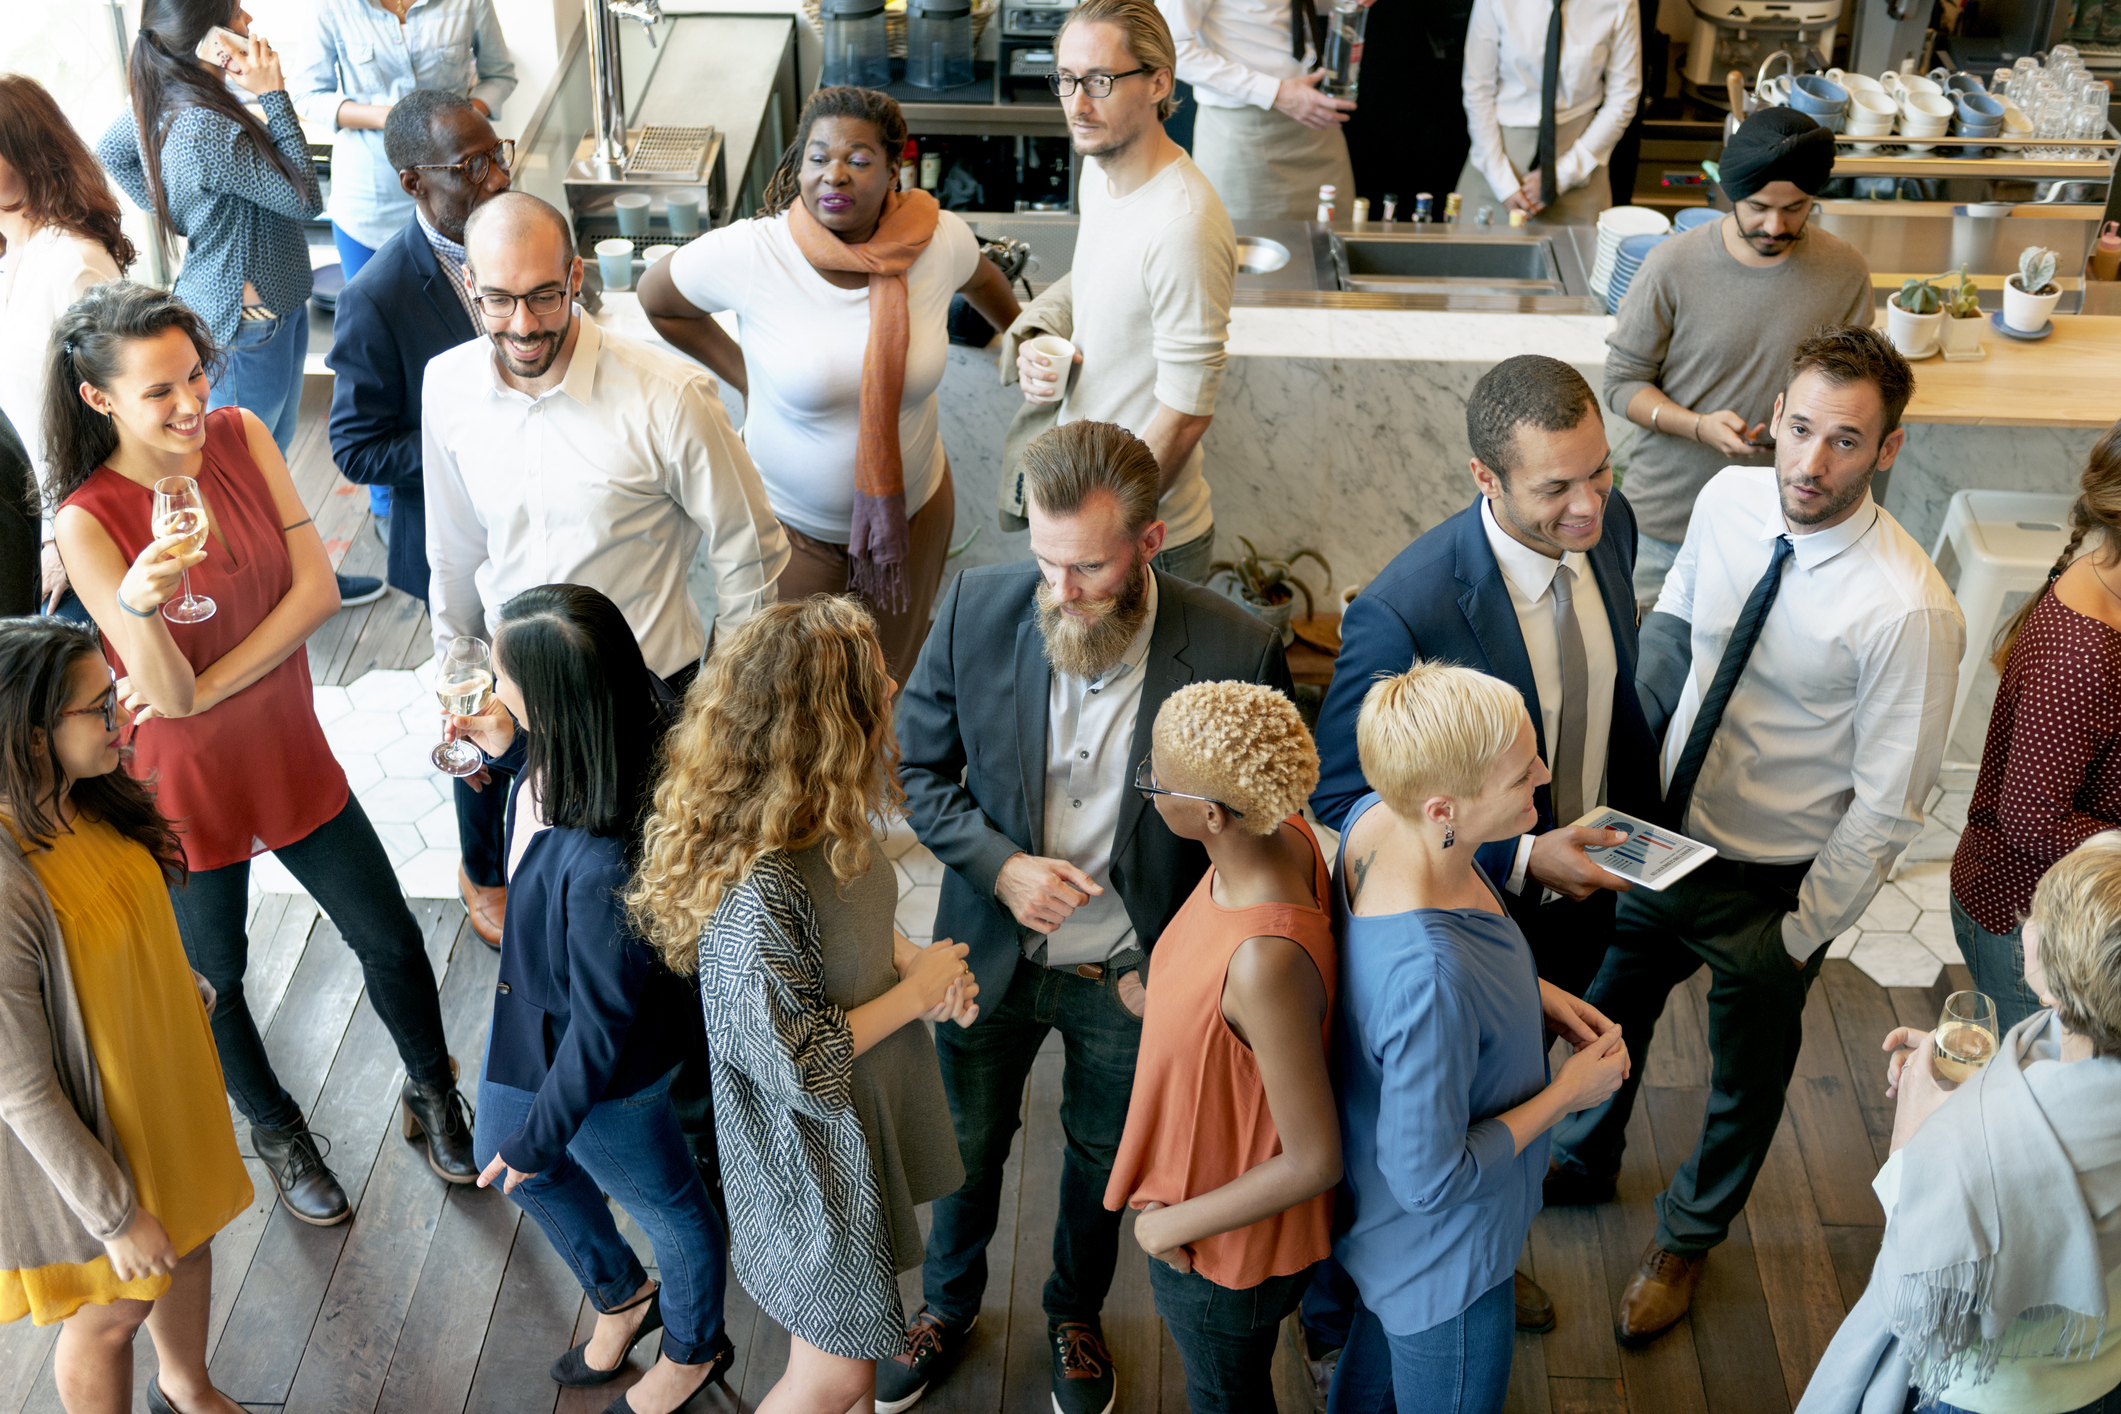 How to Improve Your Communication Skills to Network Effectively